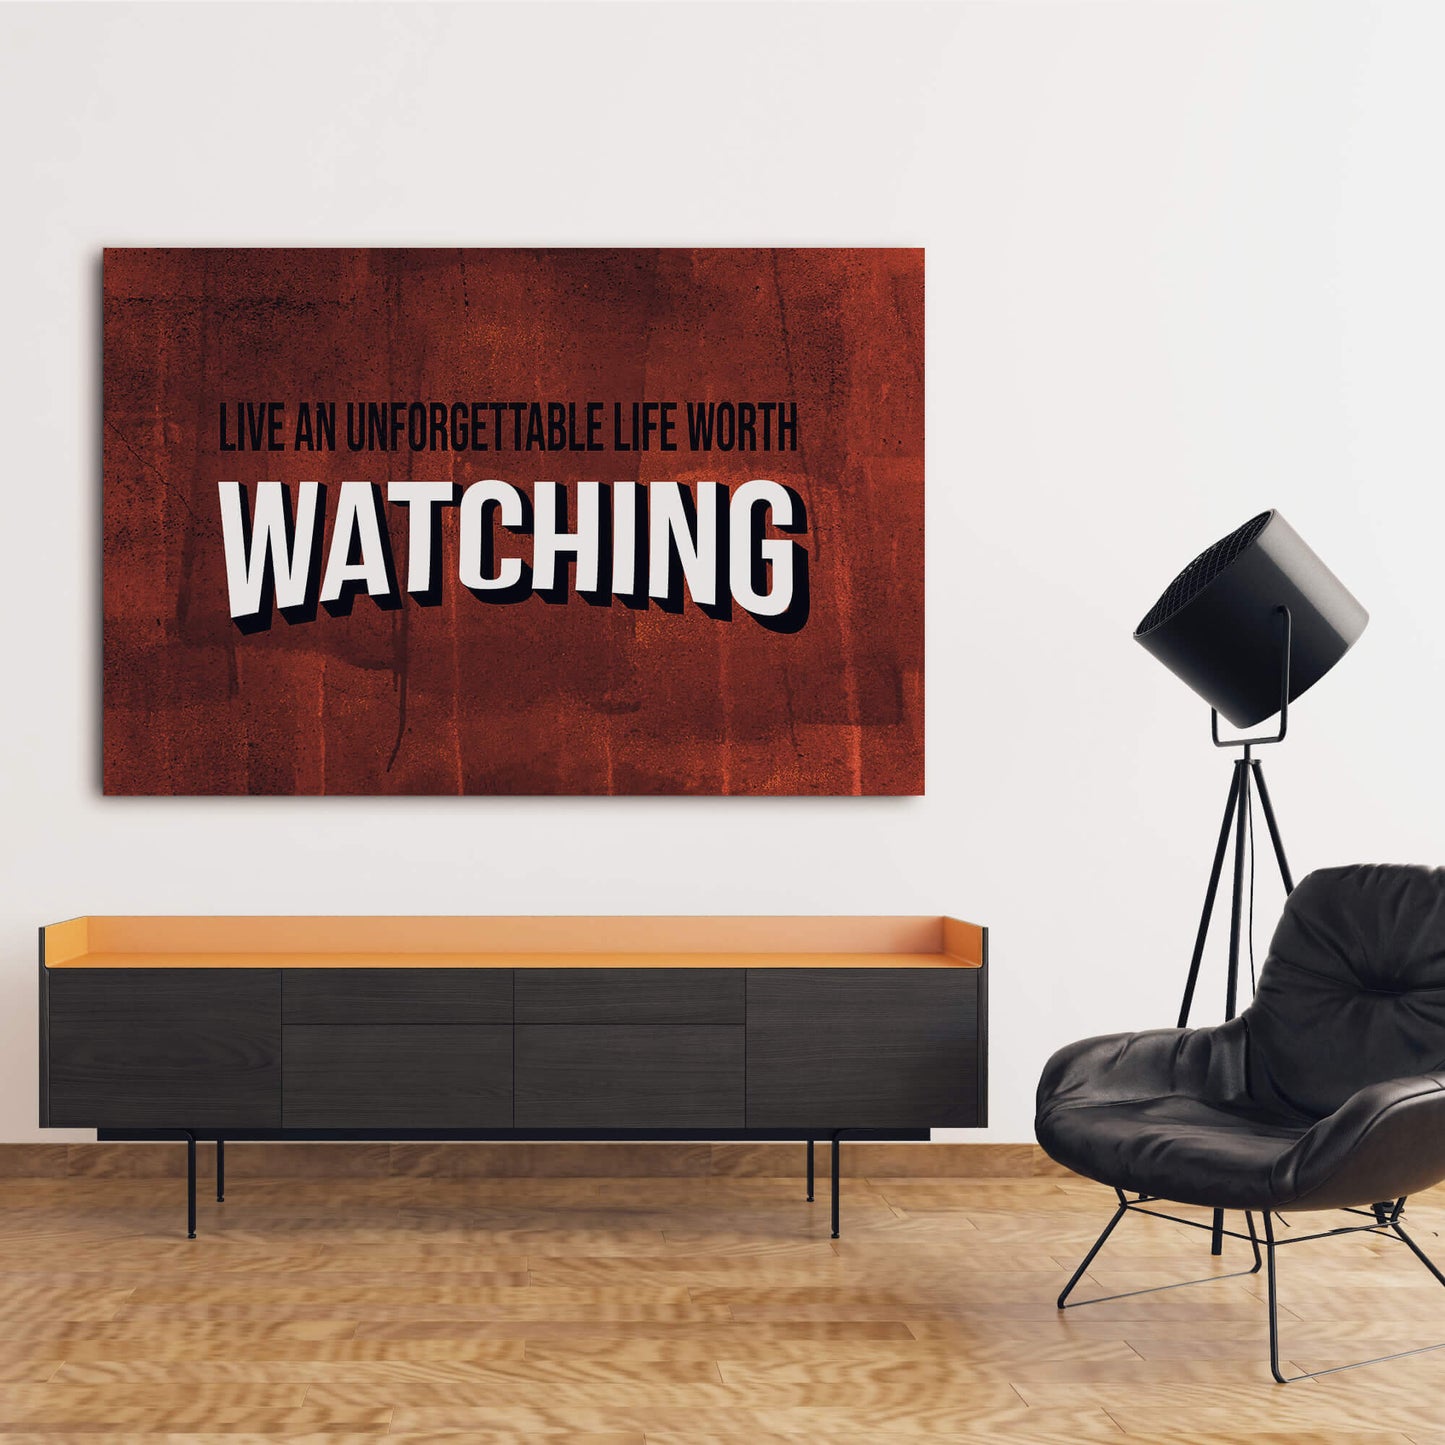 Life Worth Watching Wall Art | Inspirational Wall Art Motivational Wall Art Quotes Office Art | ImpaktMaker Exclusive Canvas Art Landscape